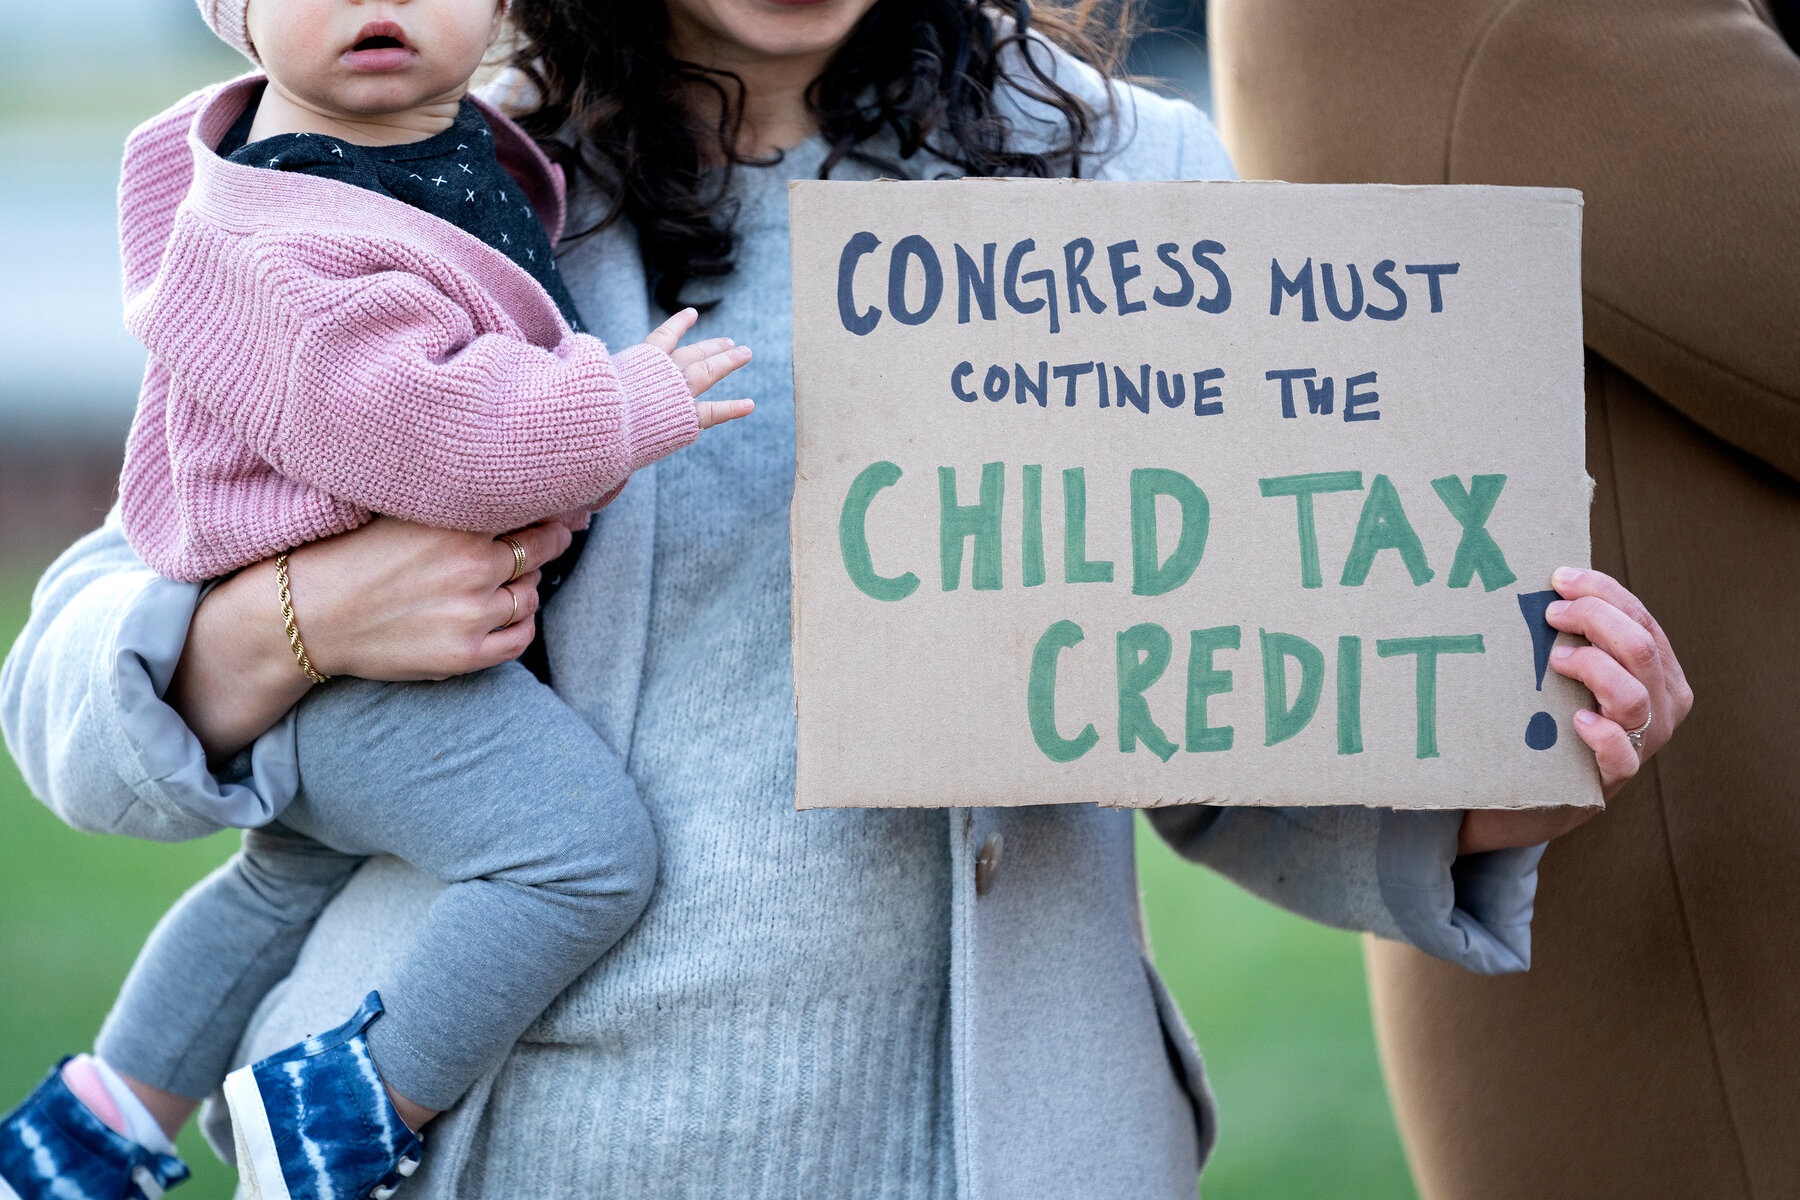 Child Tax Credit June Update: Will there be another check in June 2022?